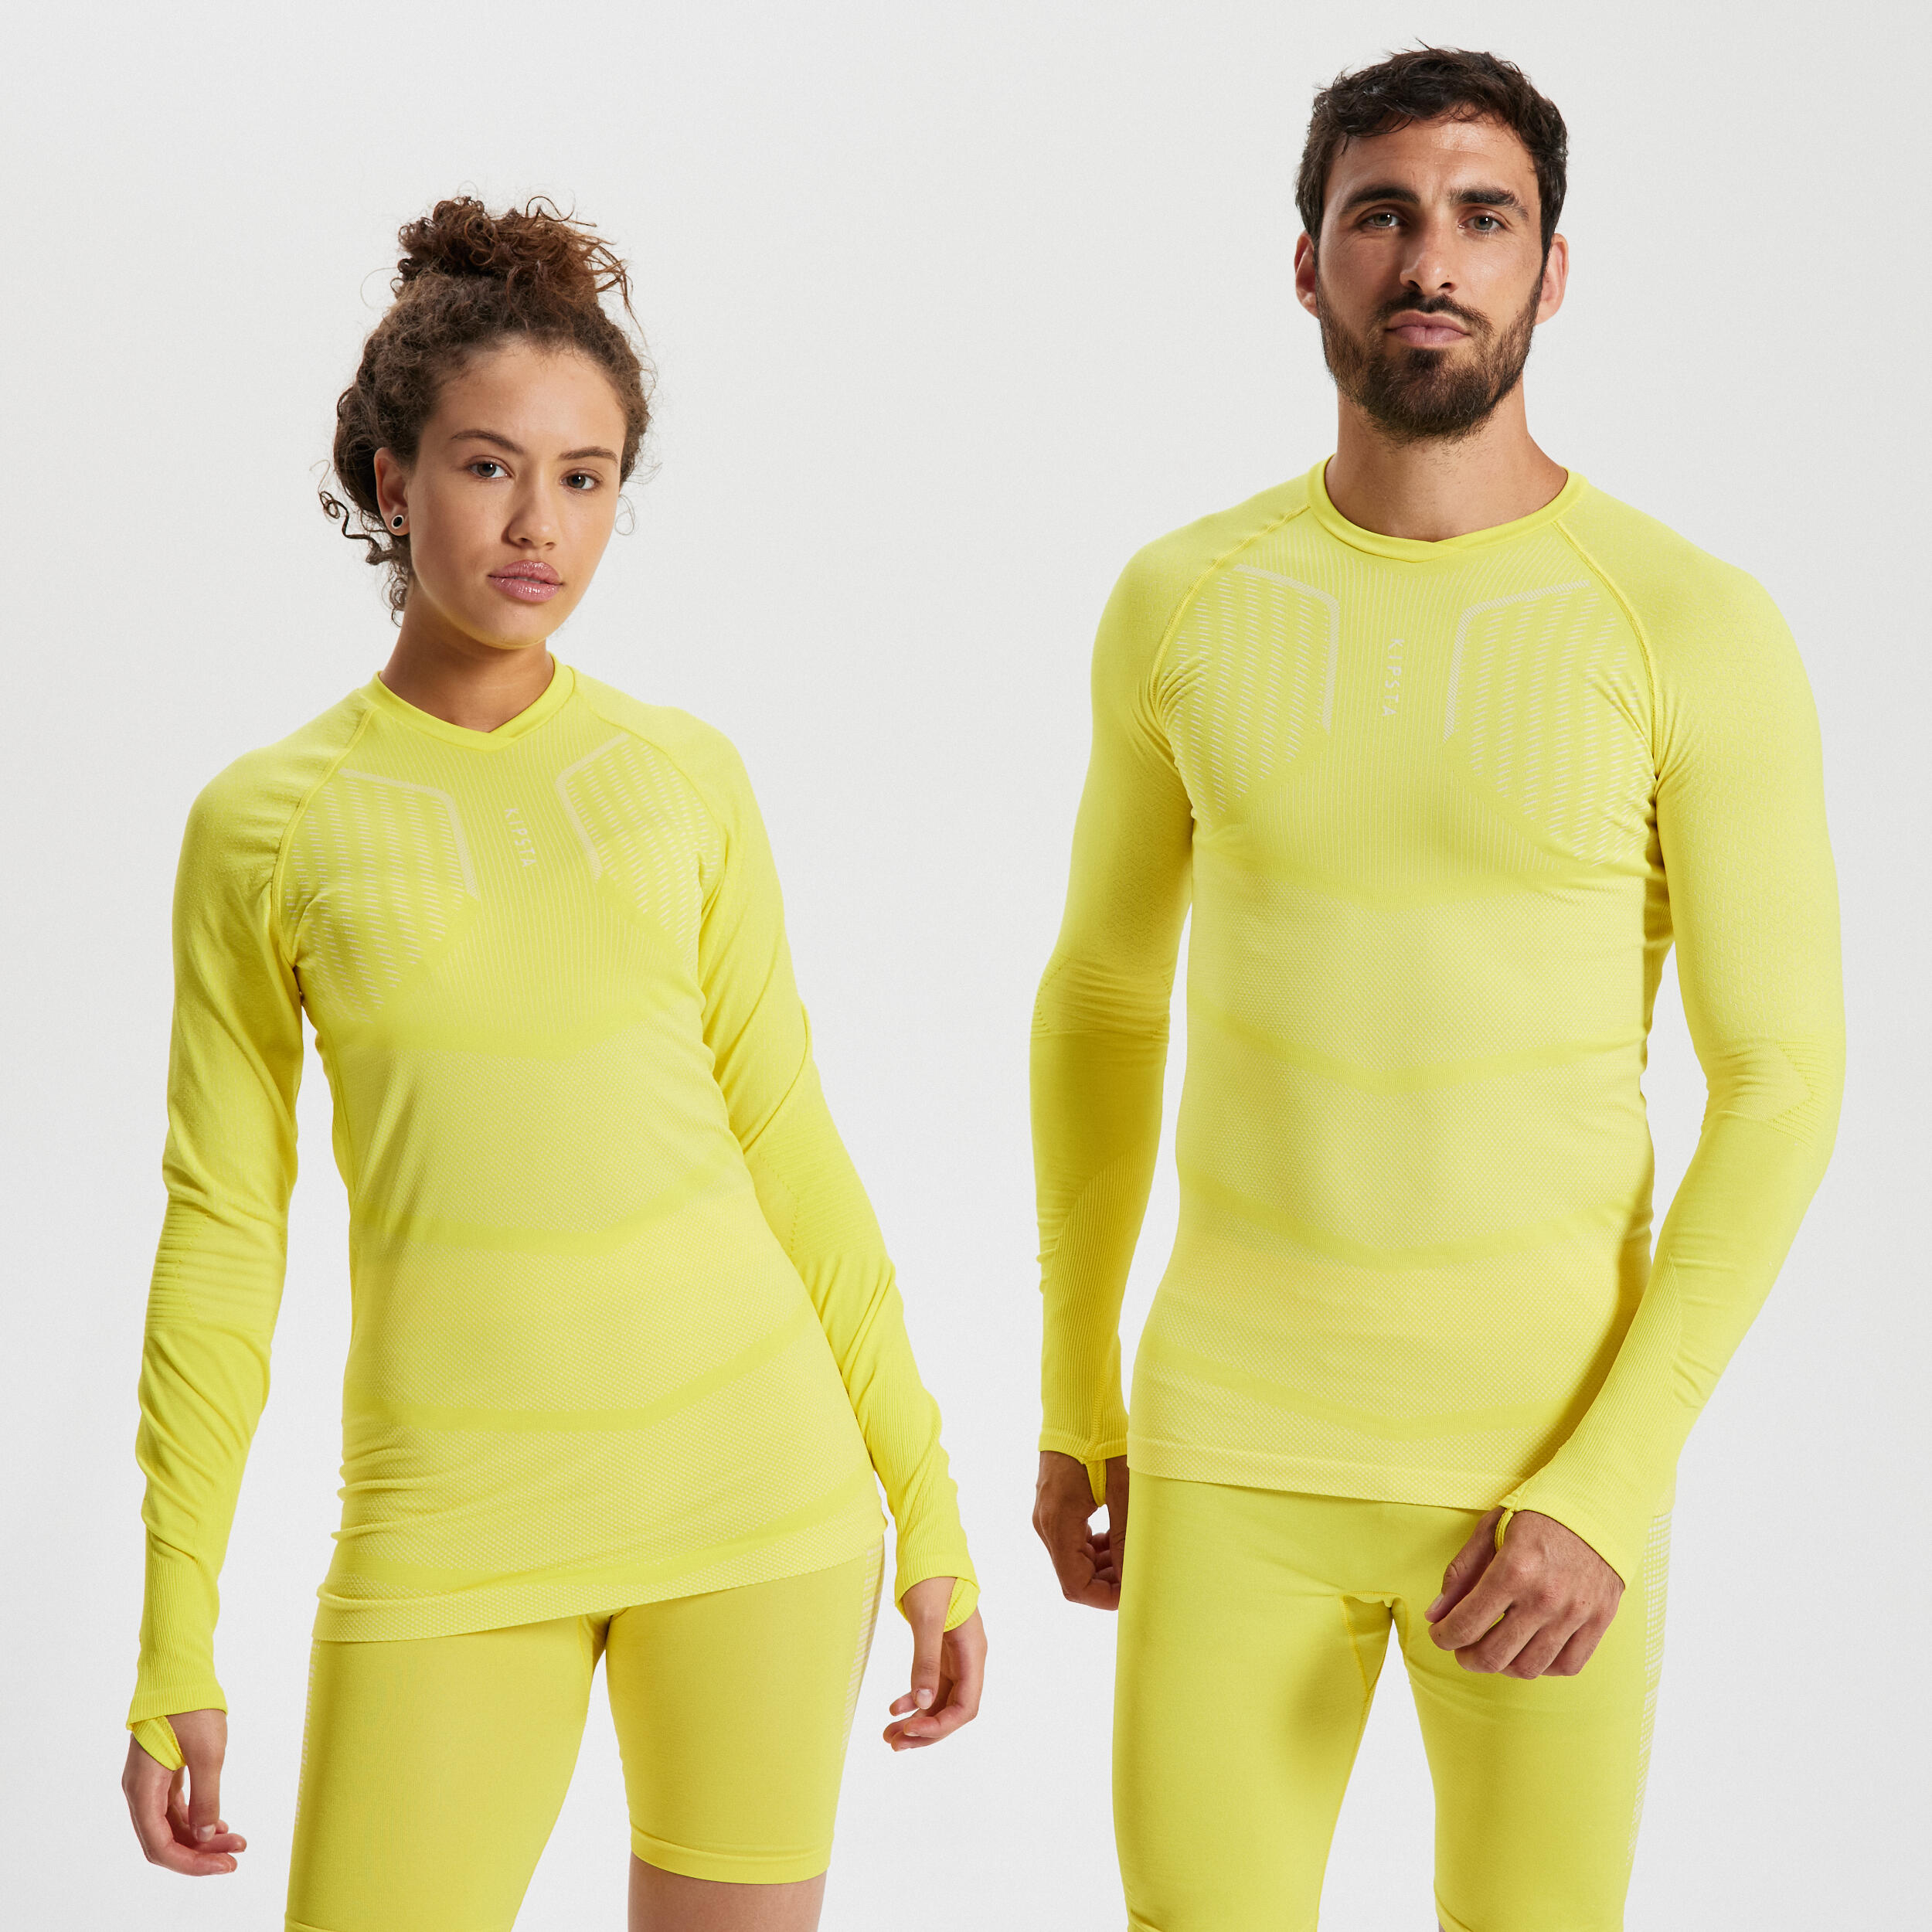 Adult Long-Sleeved Thermal Base Layer Top Keepdry 500 - Yellow 3/15